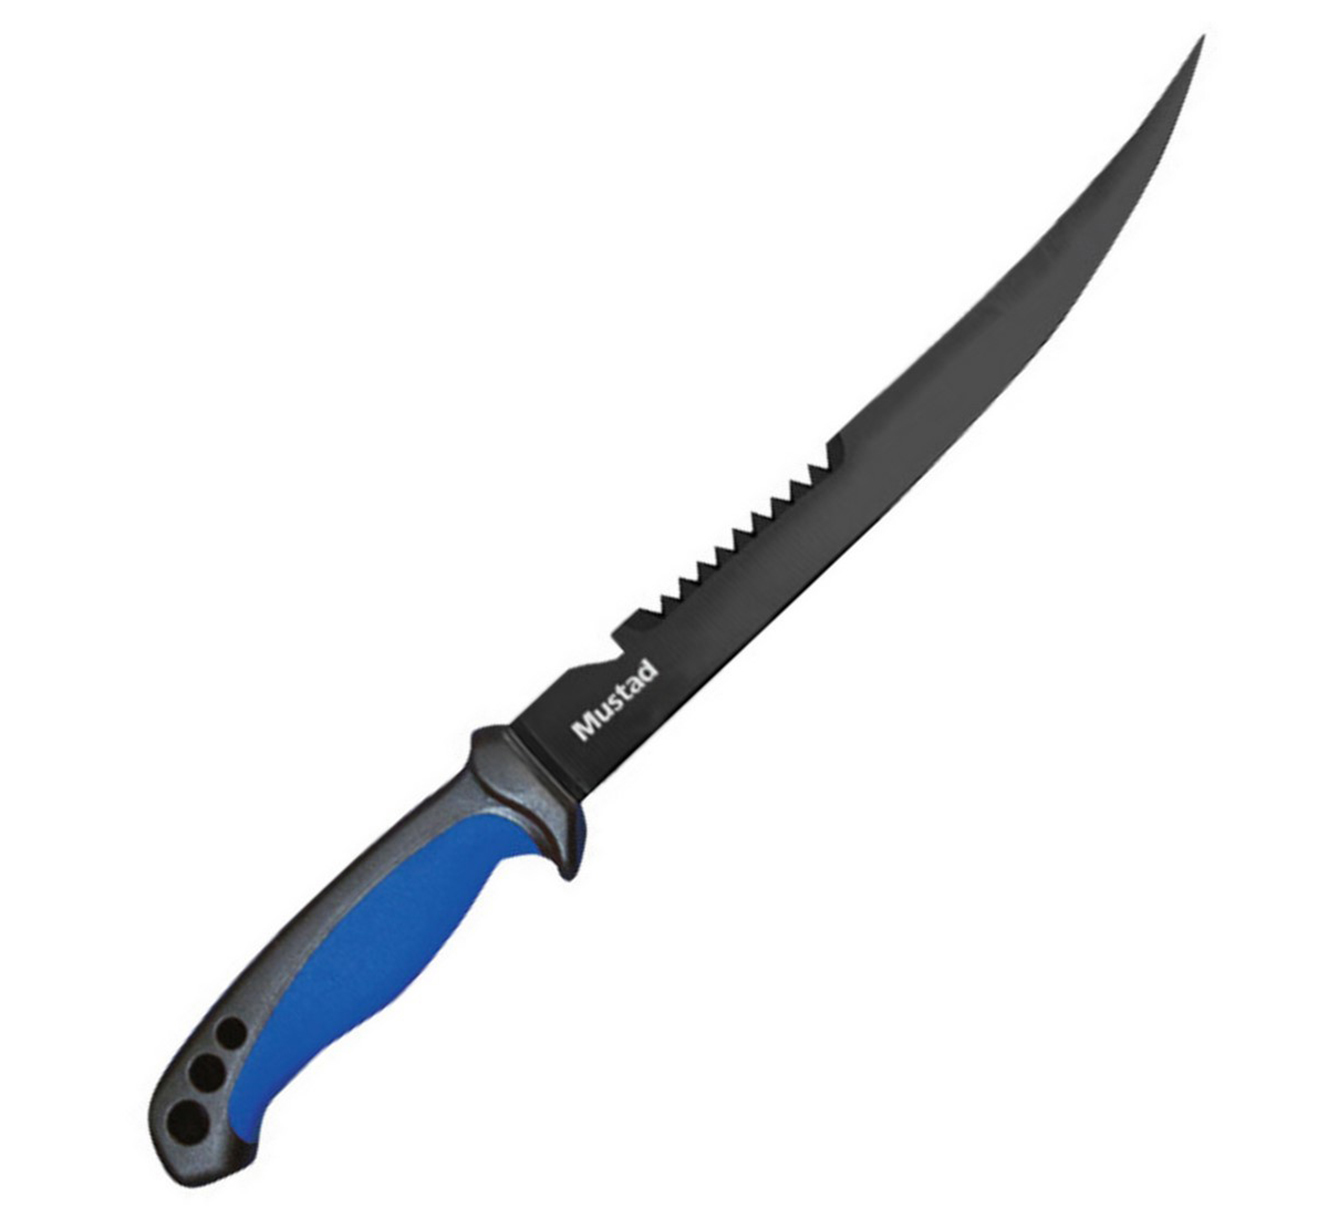 Mustad 6 Inch Stainless Steel Fillet Knife with Sheath ...